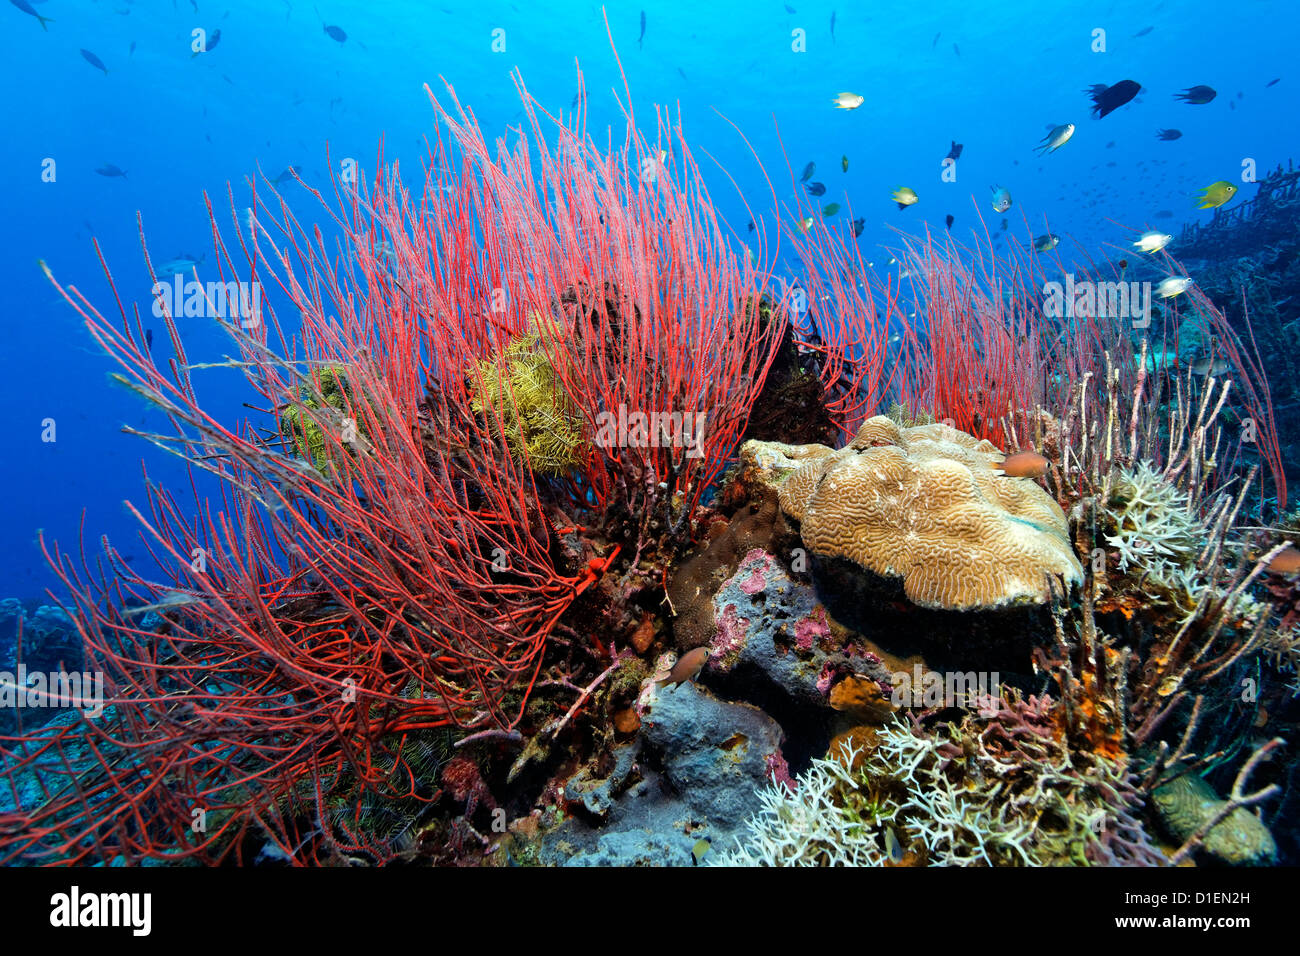 Reef landscape with soft and hard corals, Kimbe Bay, Bismark Sea, Papua New Guinea, underwater shot Stock Photo